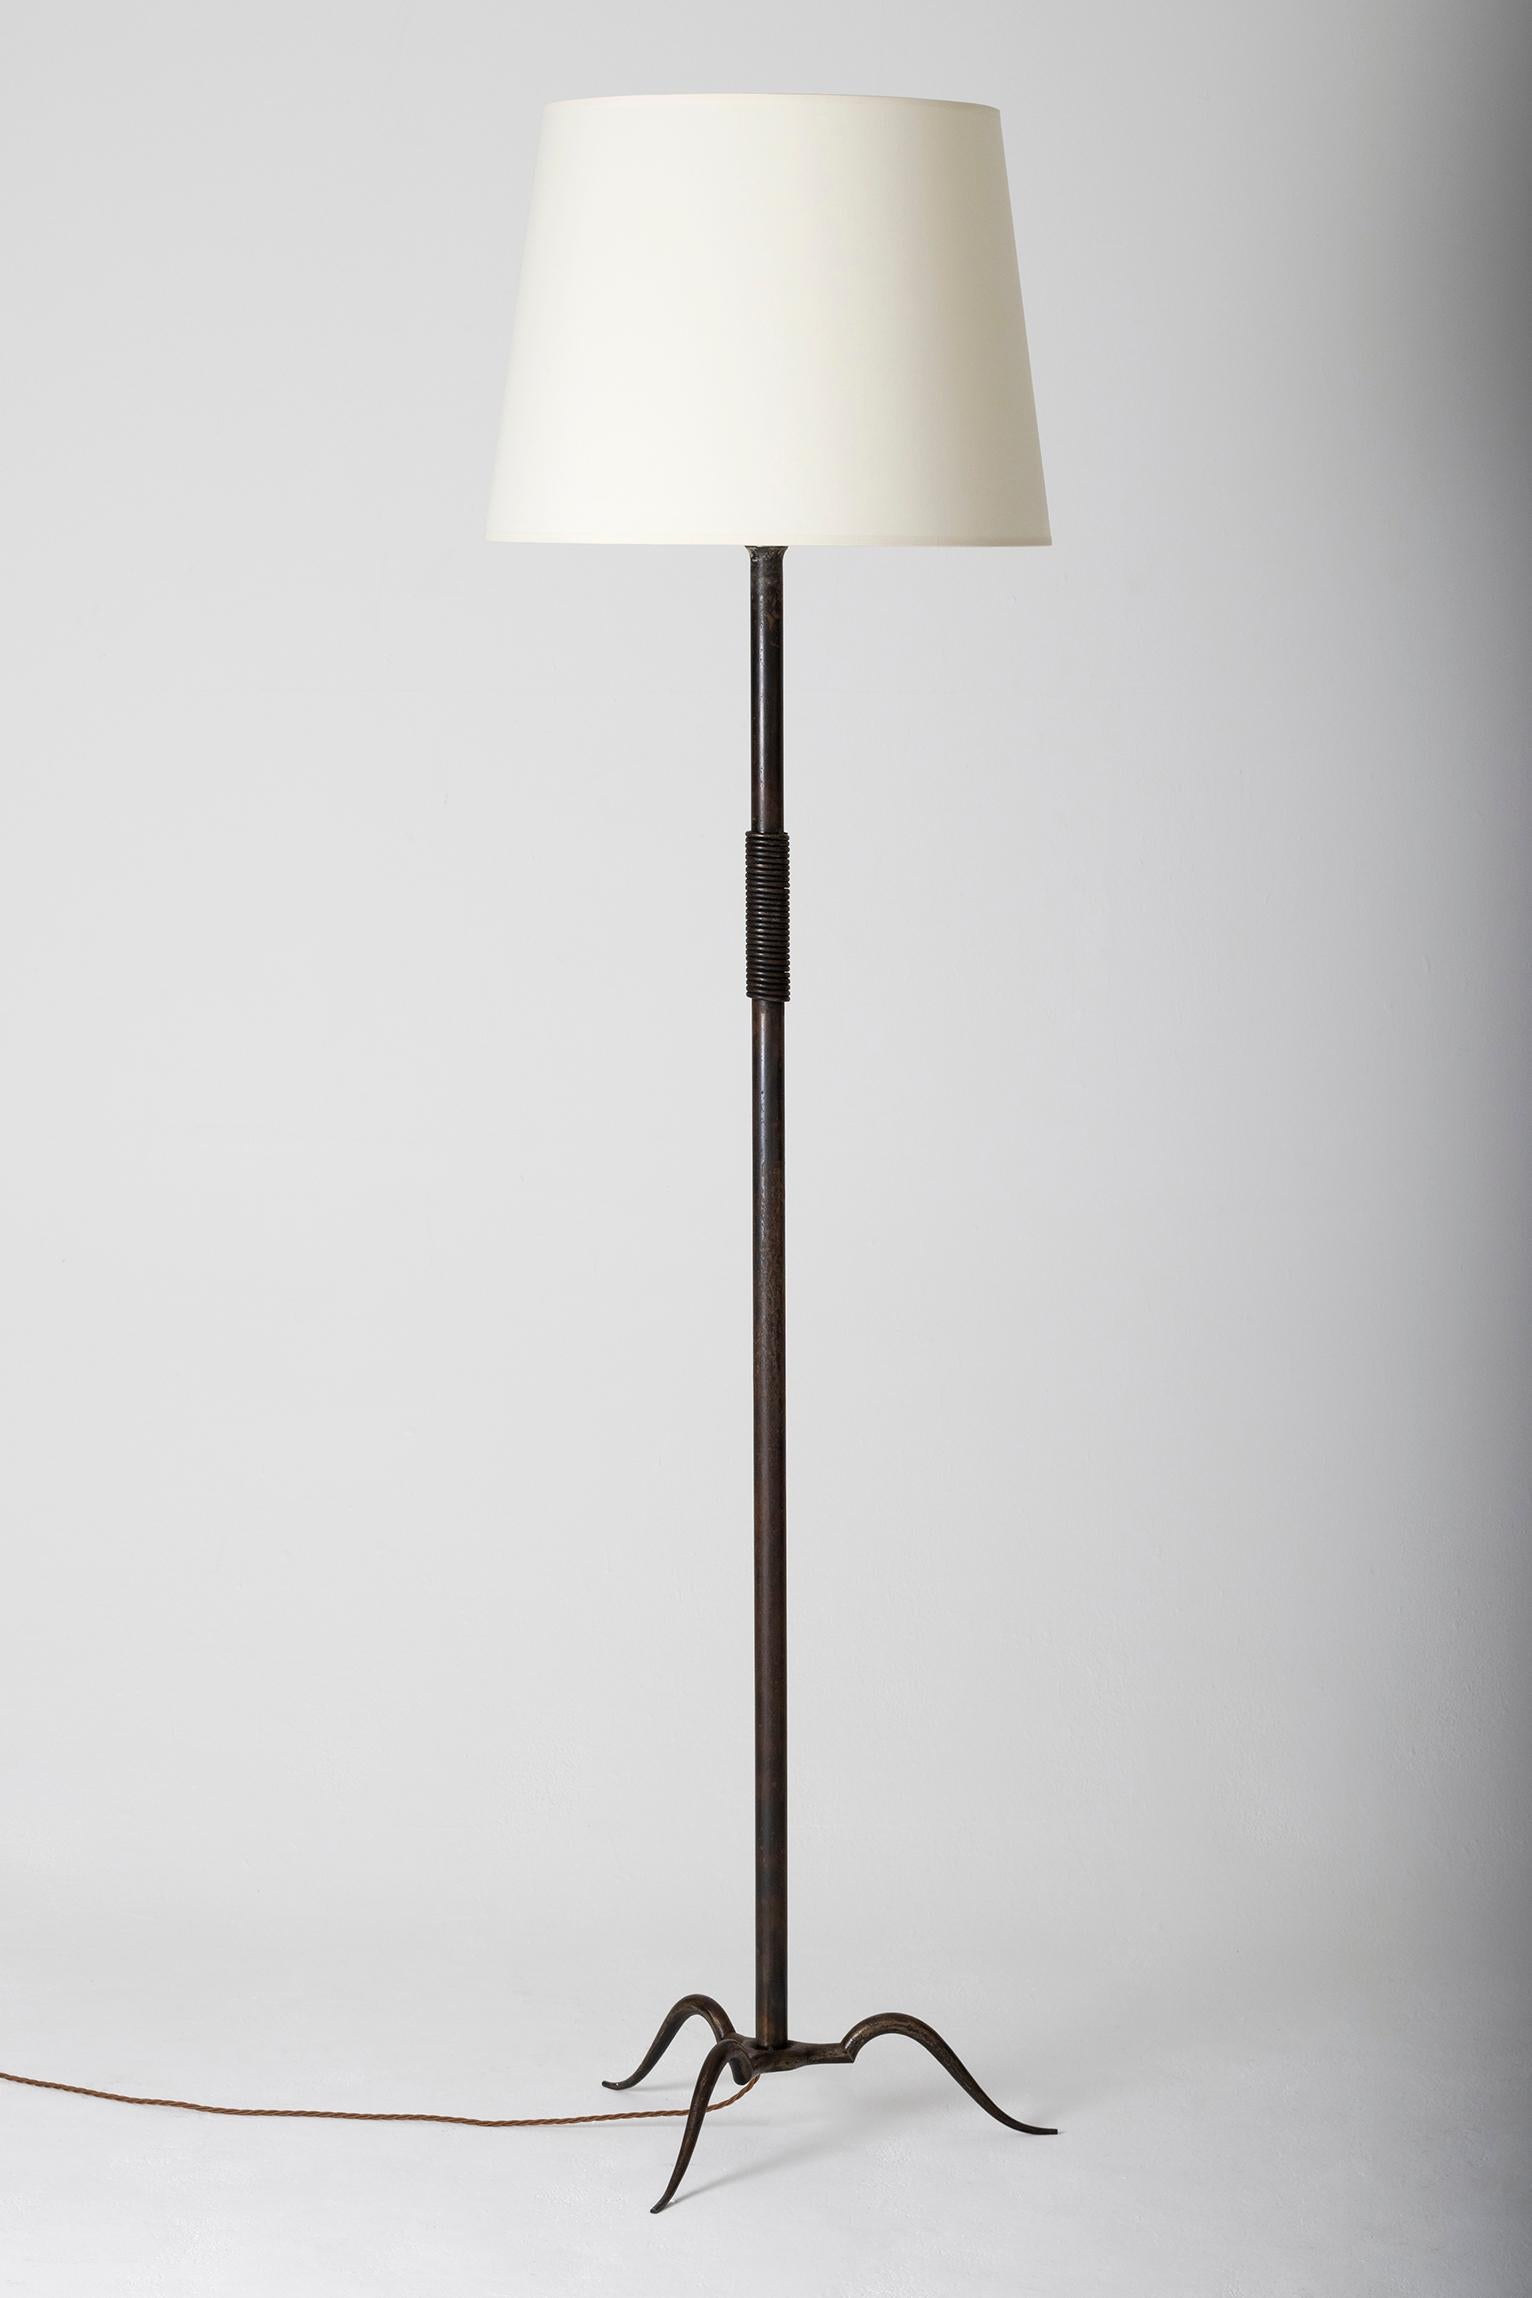 An important Art Deco wrought iron floor lamp by Michel Zadounaïsky (1903-1983).
France, circa 1930.
With the shade: 183 cm tall by 51 cm diameter.
Lamp base only: 150 cm tall by 46 cm width (leg to leg).